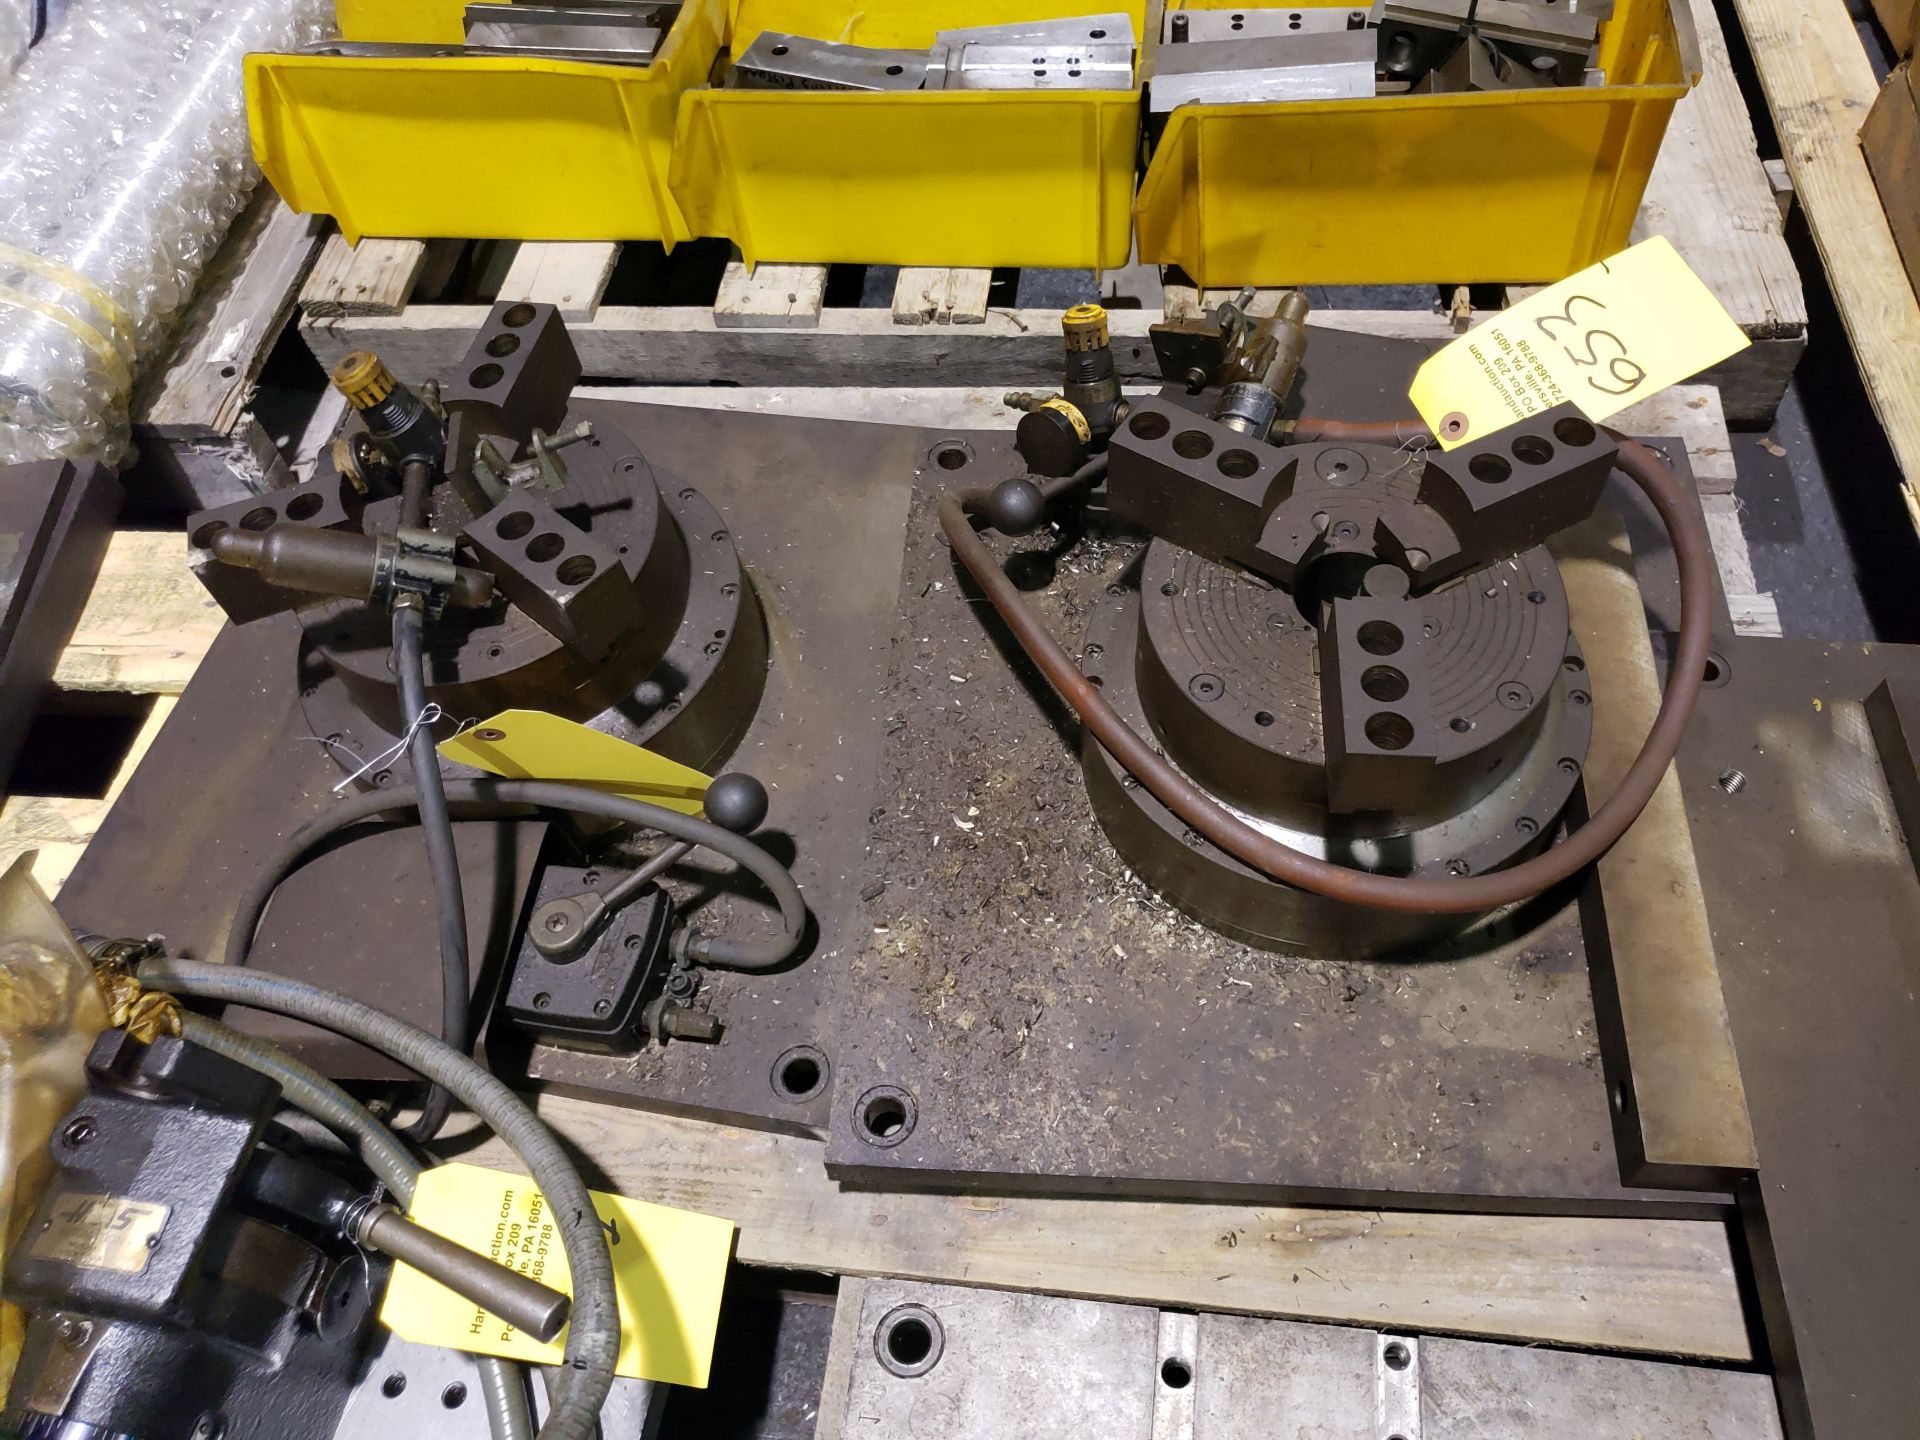 2 AIR INDEXERS & CENTER ON BACK PLATES